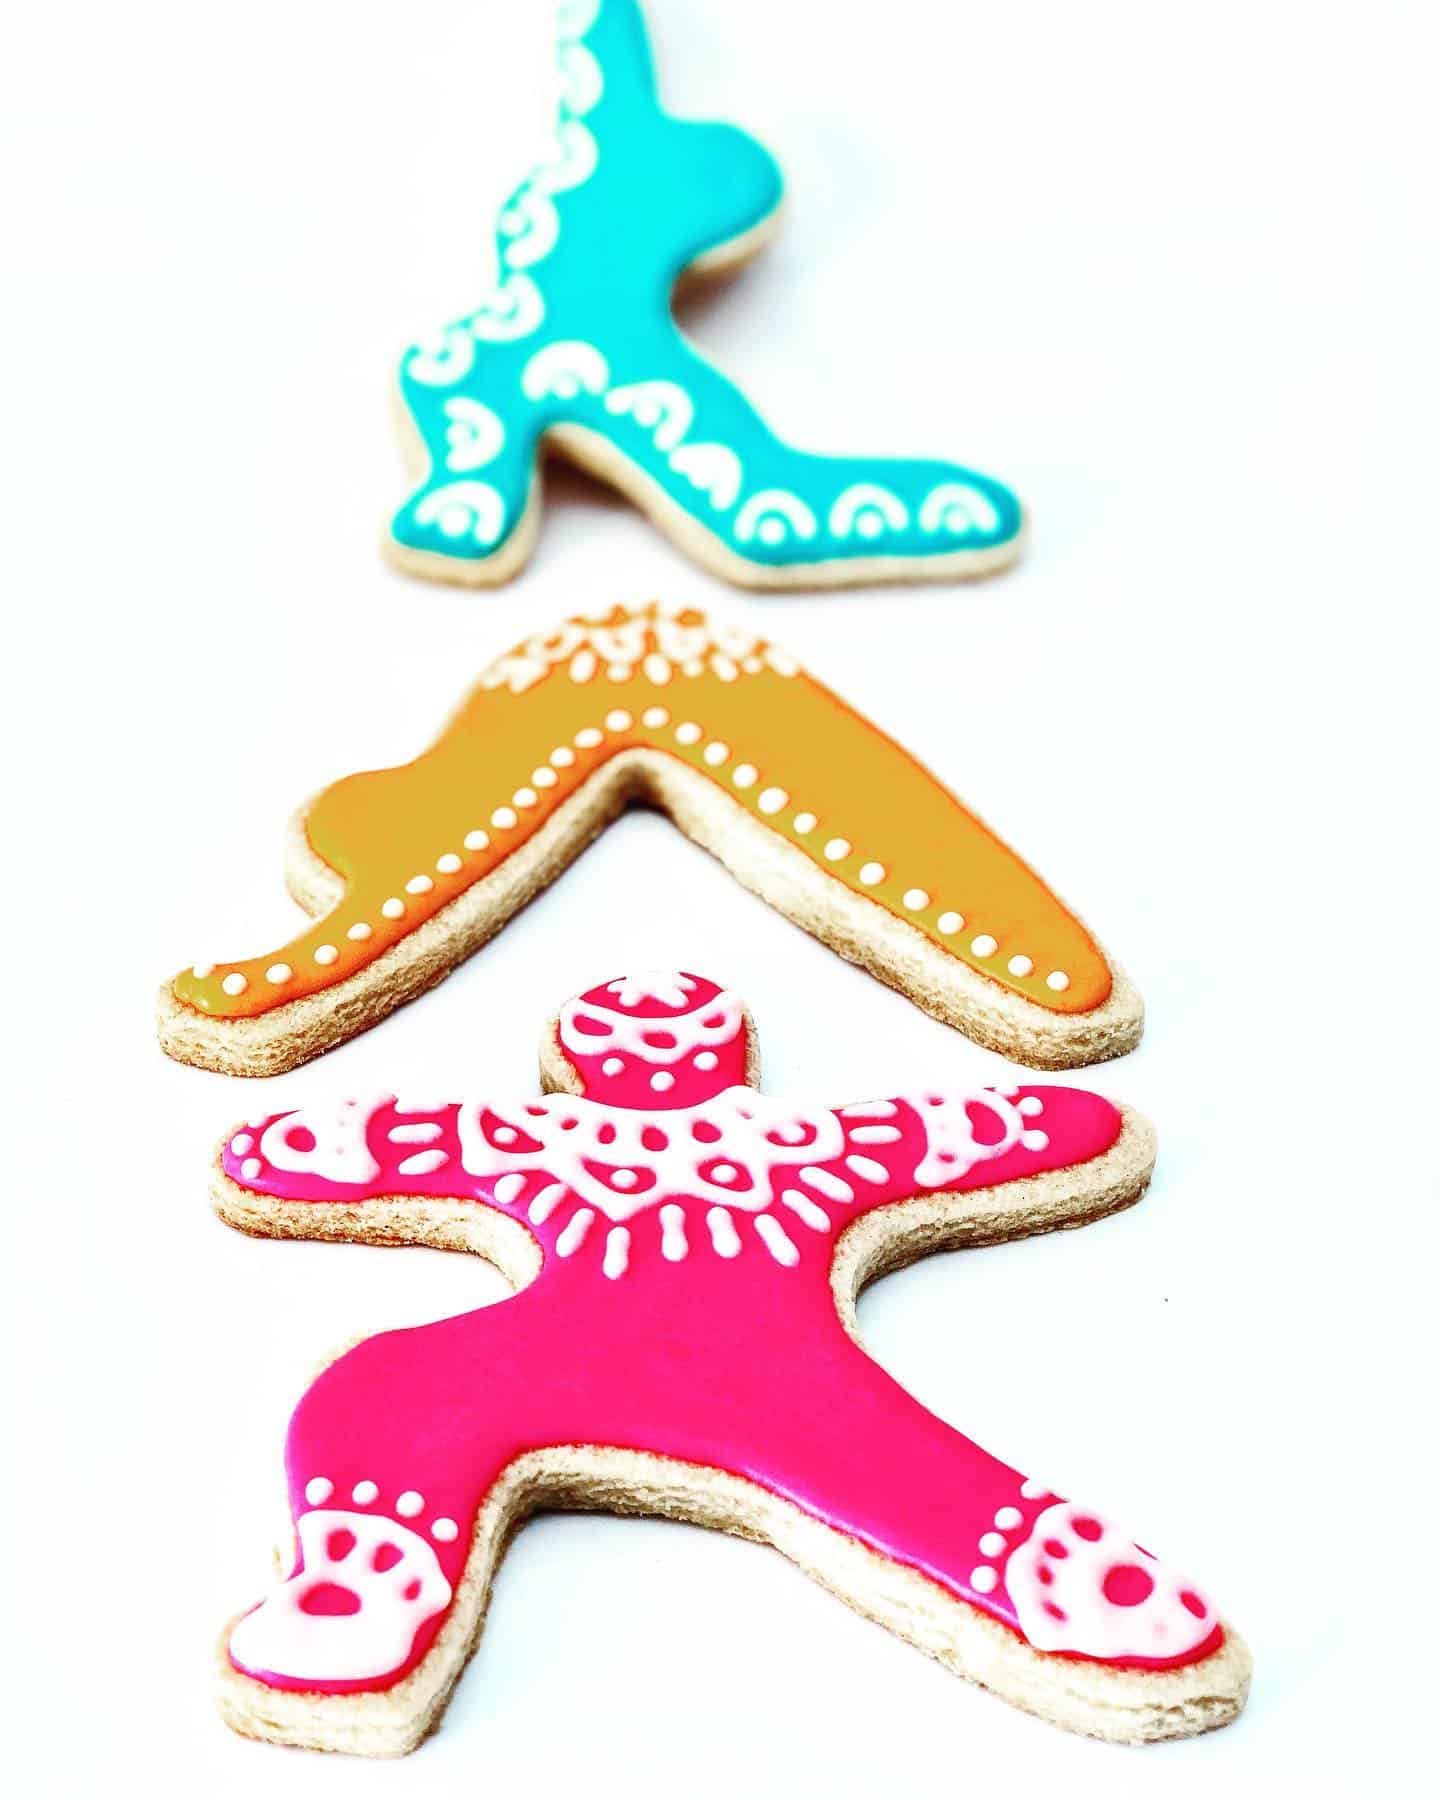 Yummi yogi cookie cutters available in 5 poses!